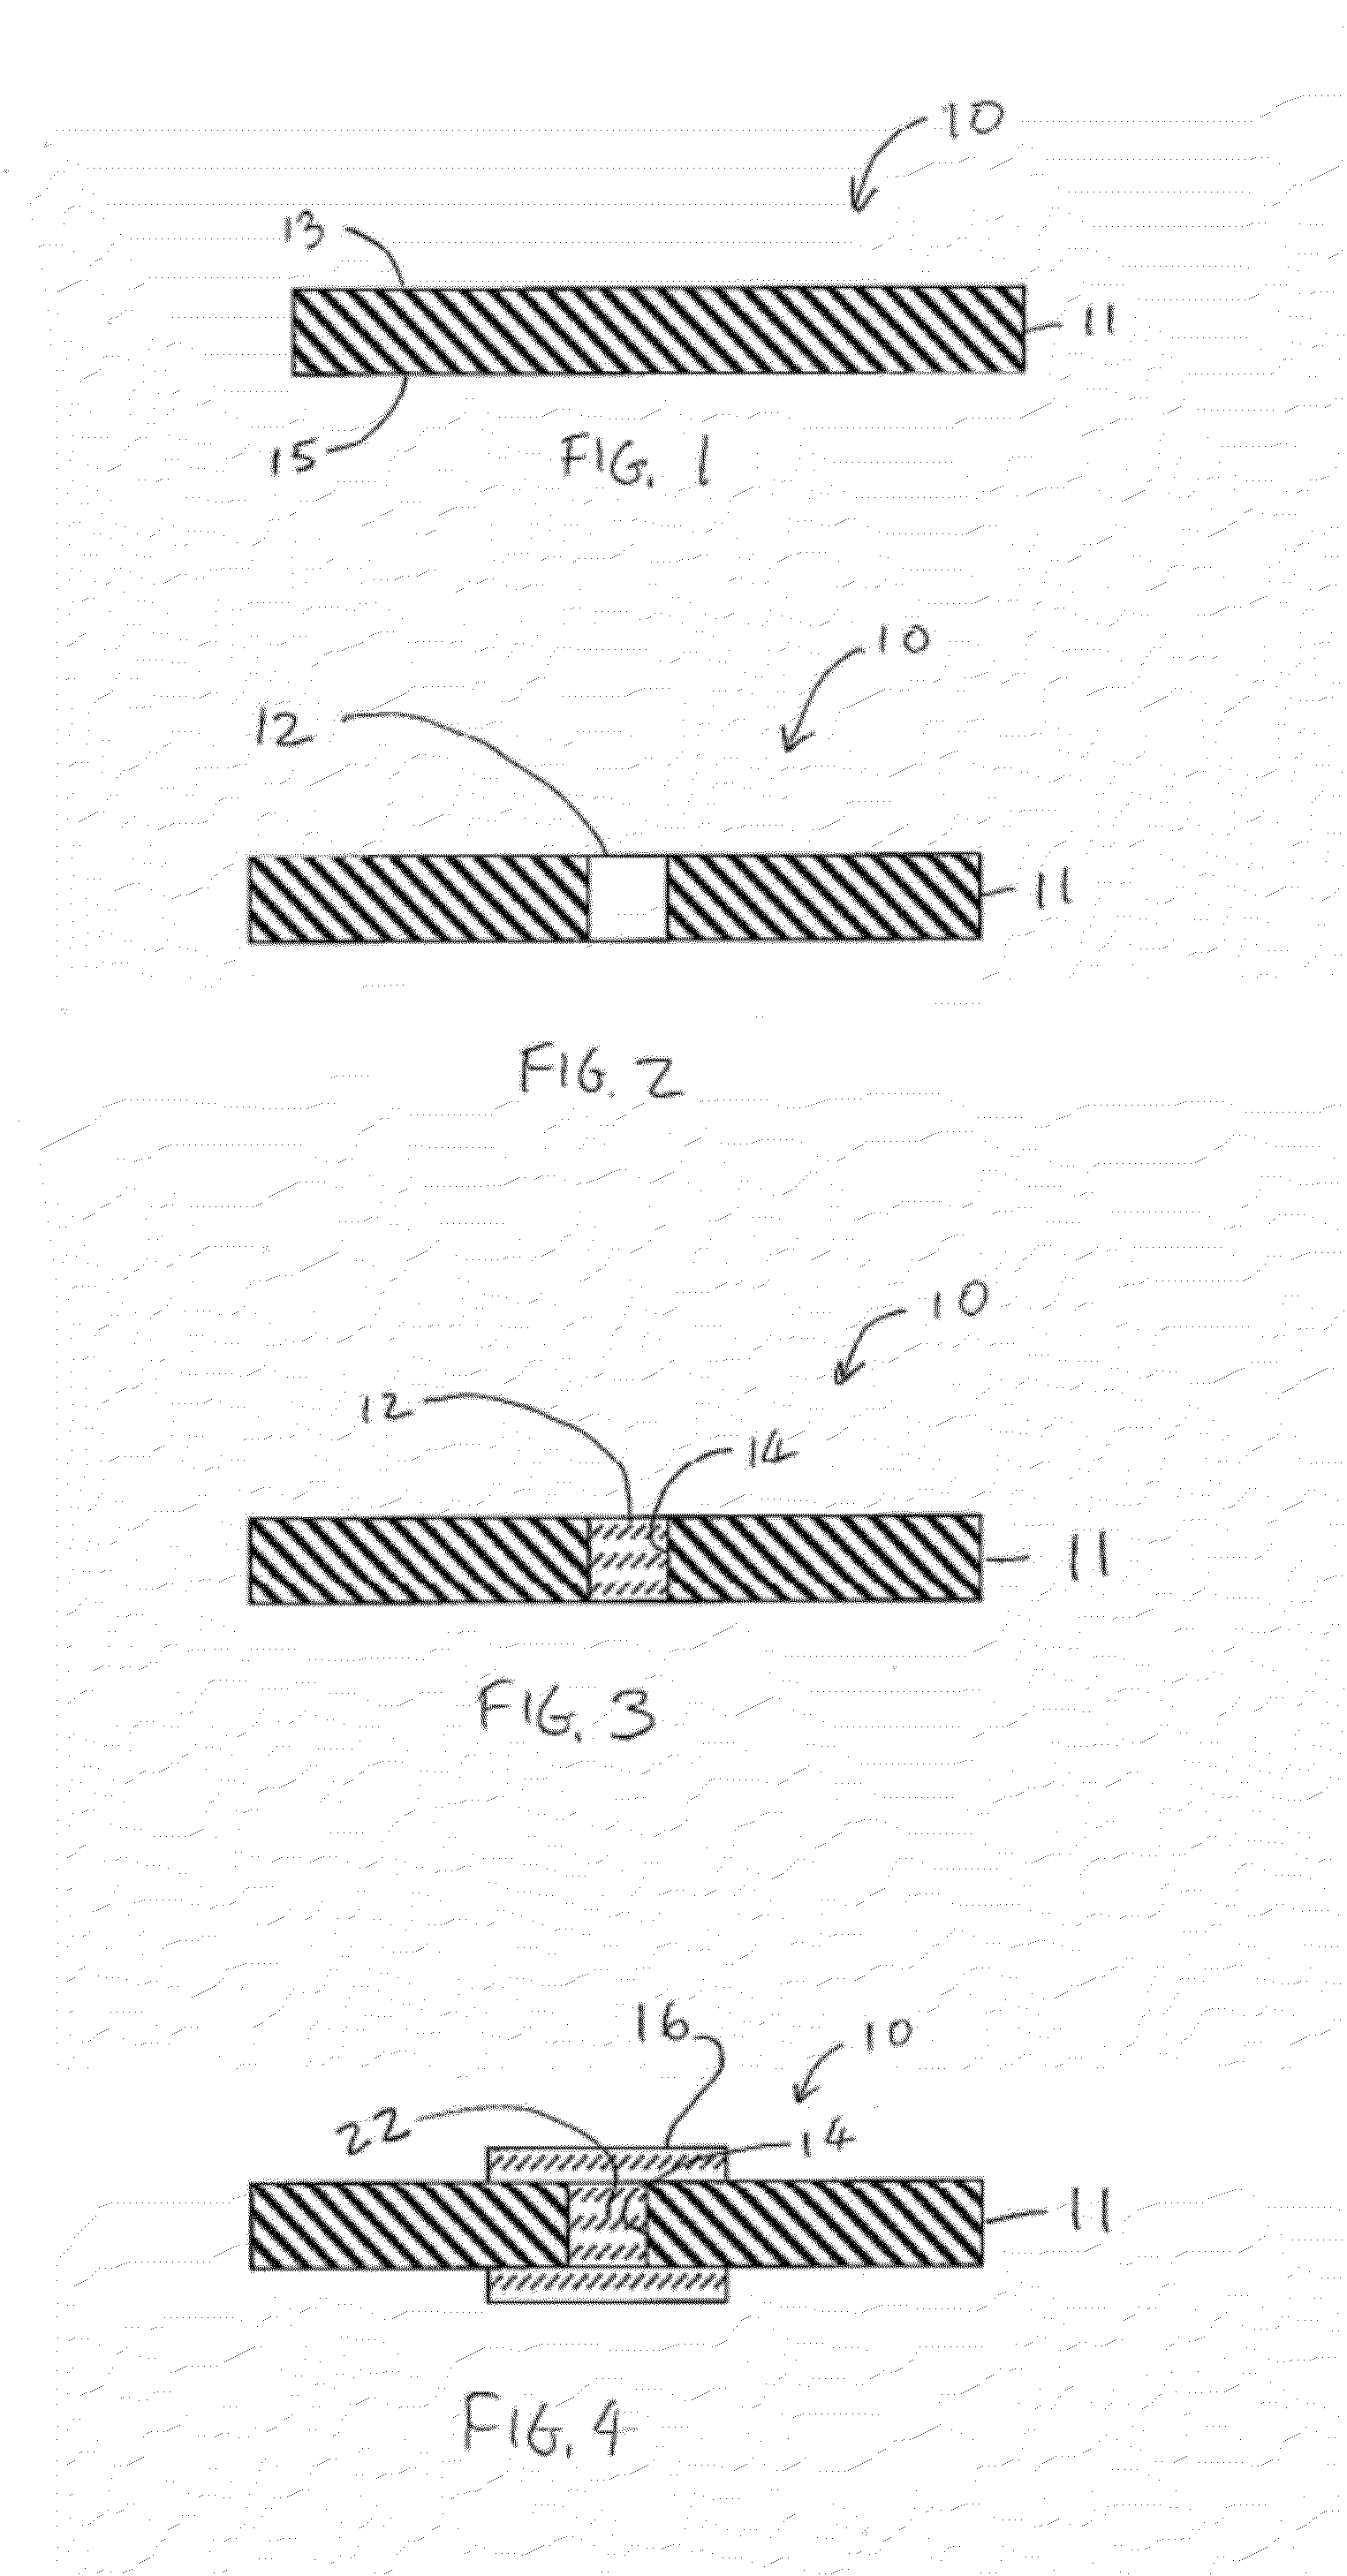 Circuitized substrate with dielectric interposer assembly and method